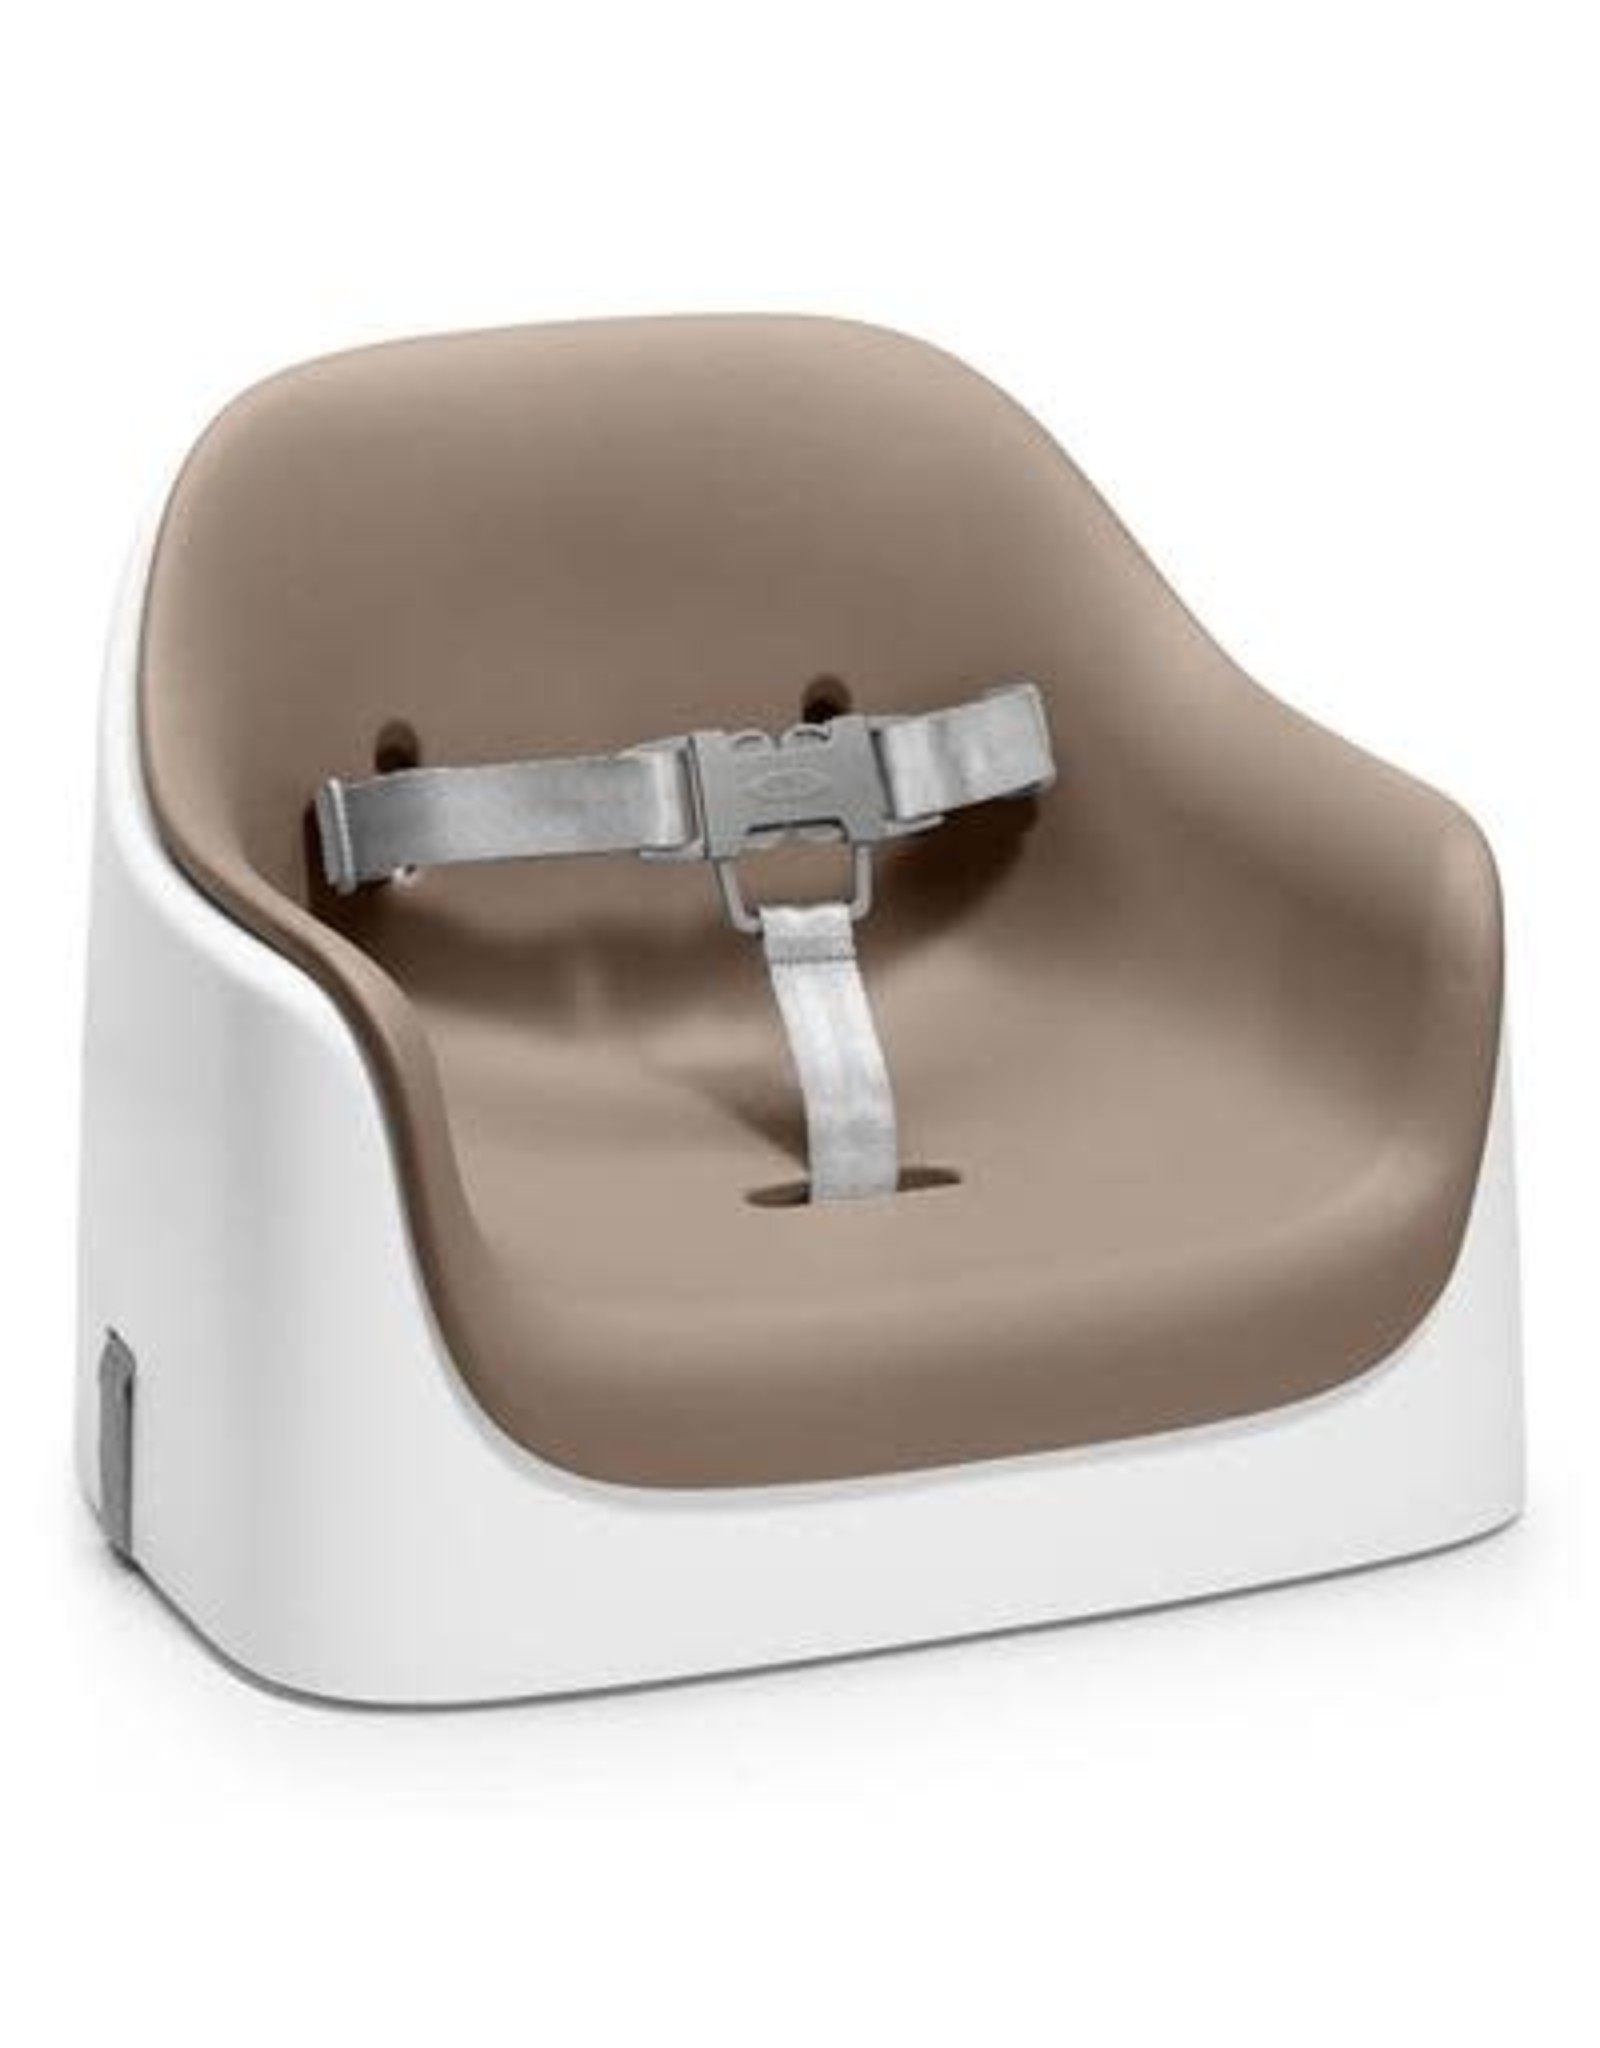 Oxo Nest Booster, Taupe w/ Removable Cushion